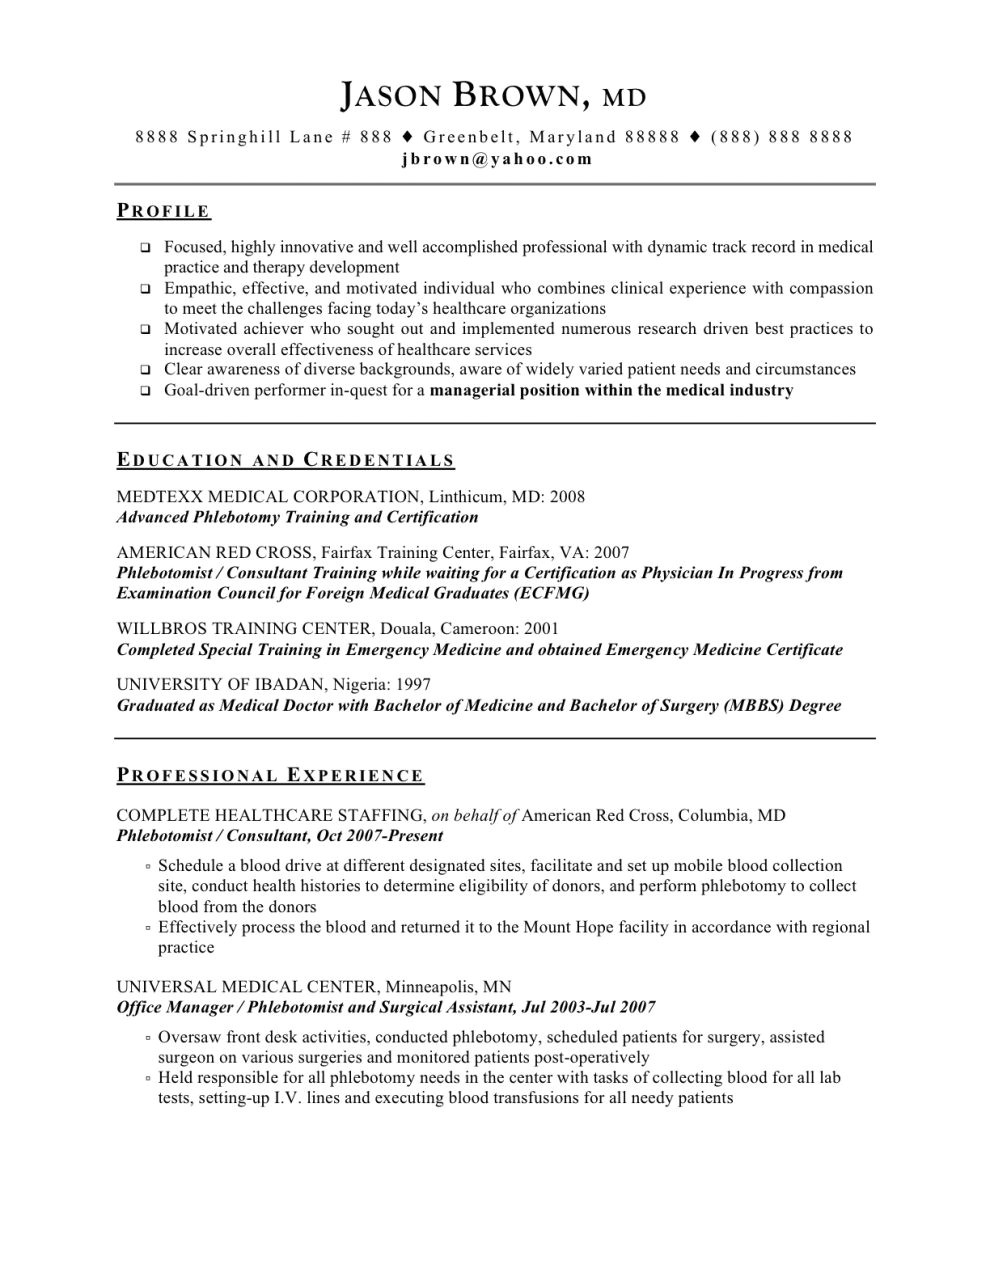 free phlebotomy resume templates to get you noticed now